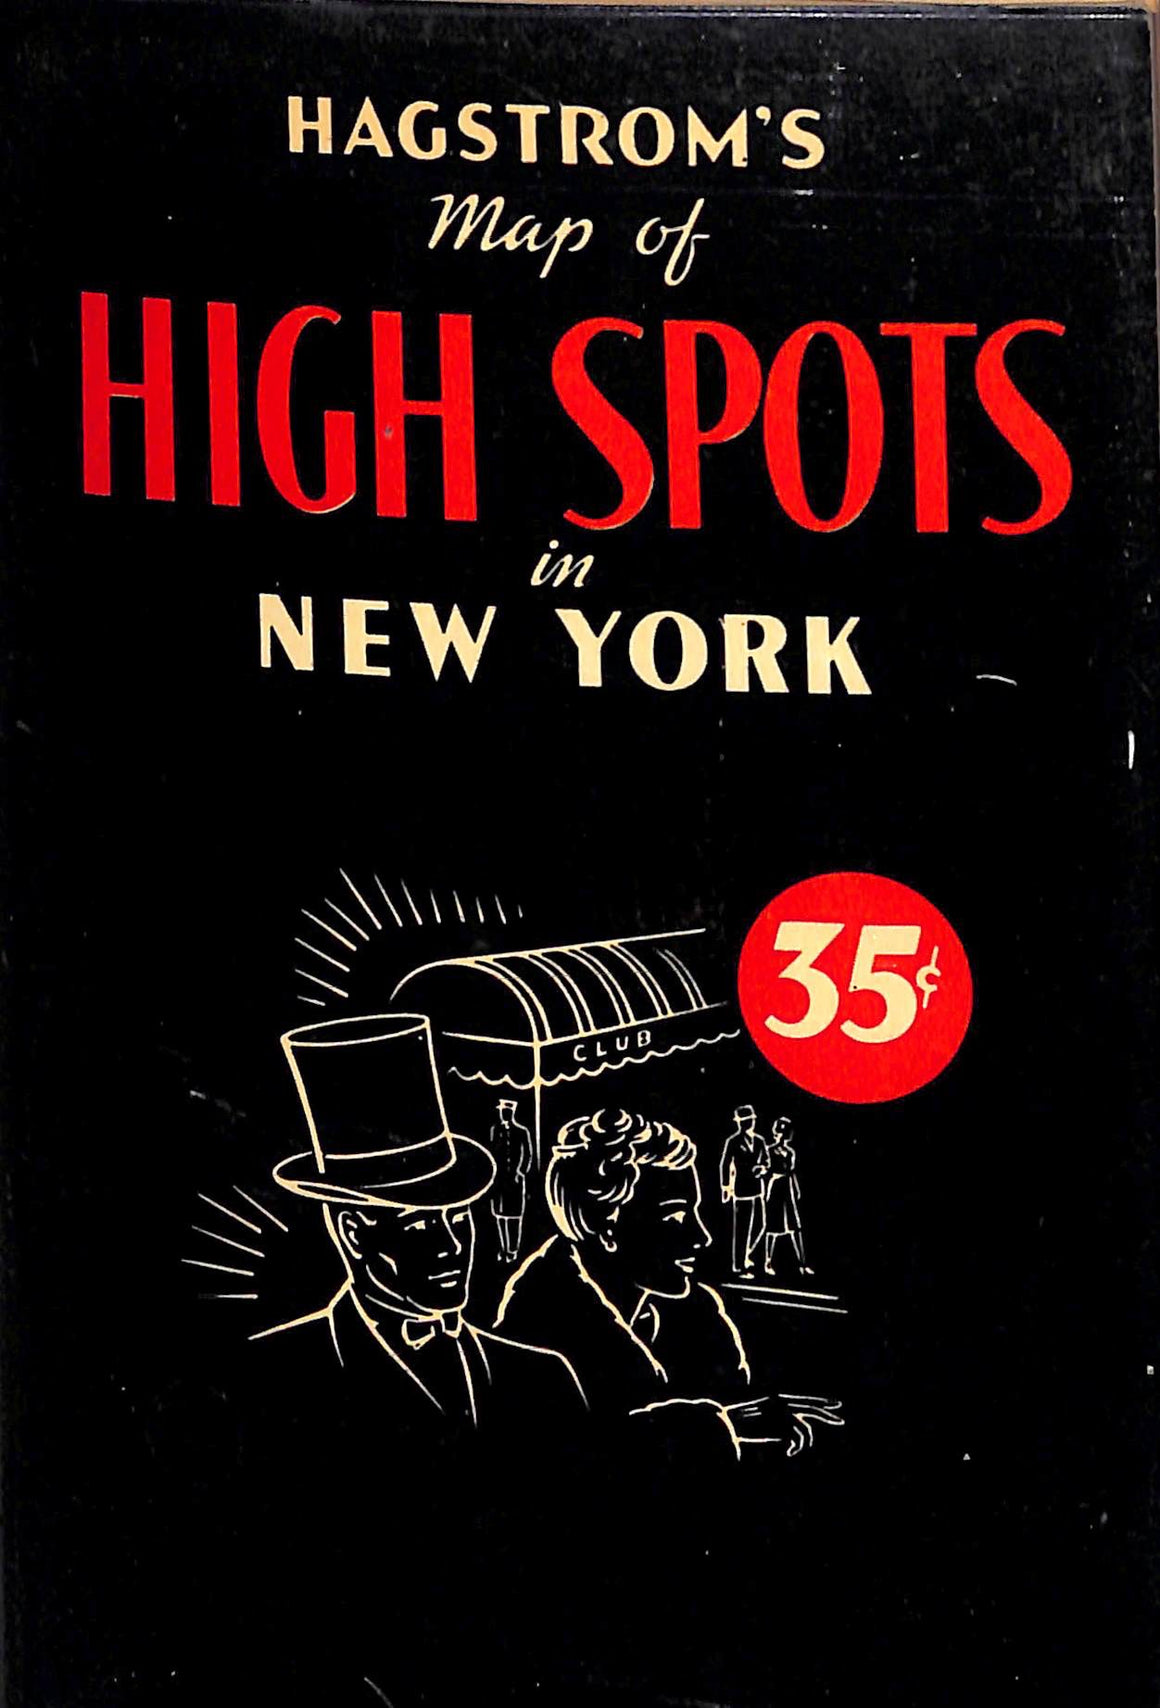 "Hagstrom's c1960 Map of High Spots in New York"